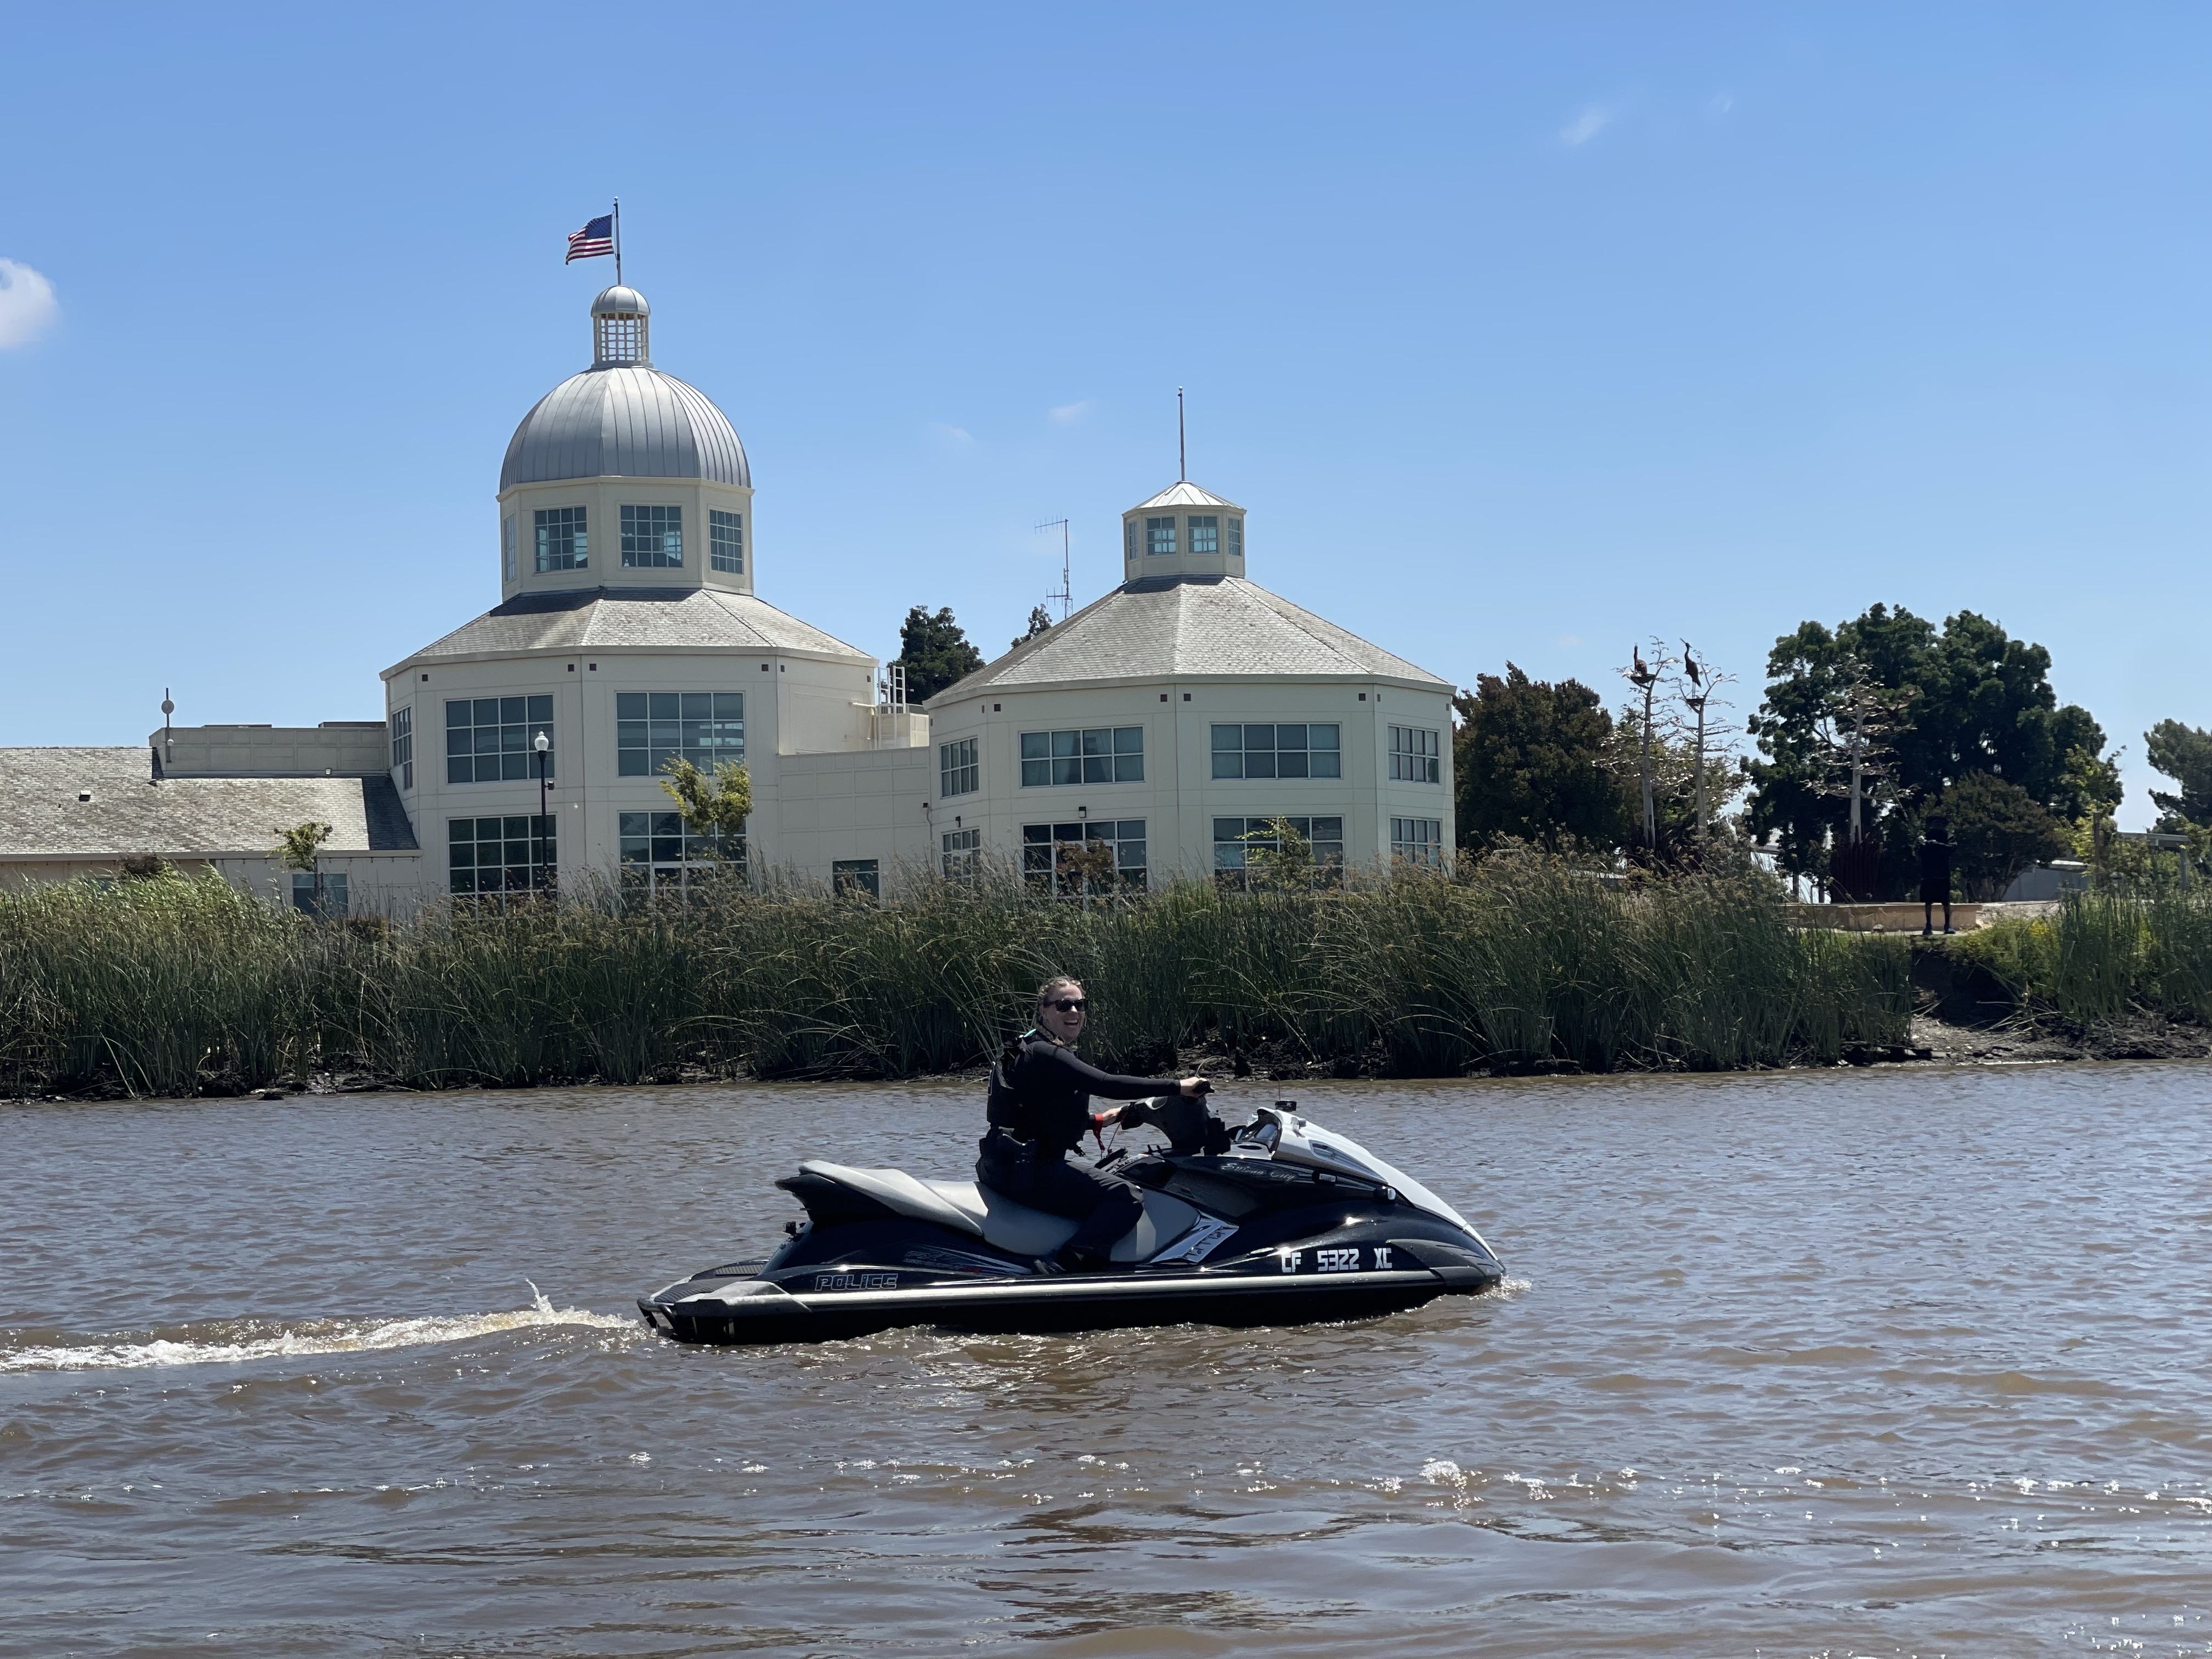 A Boat Patrol Officer on a jet ski with Suisun City Hall in the background.